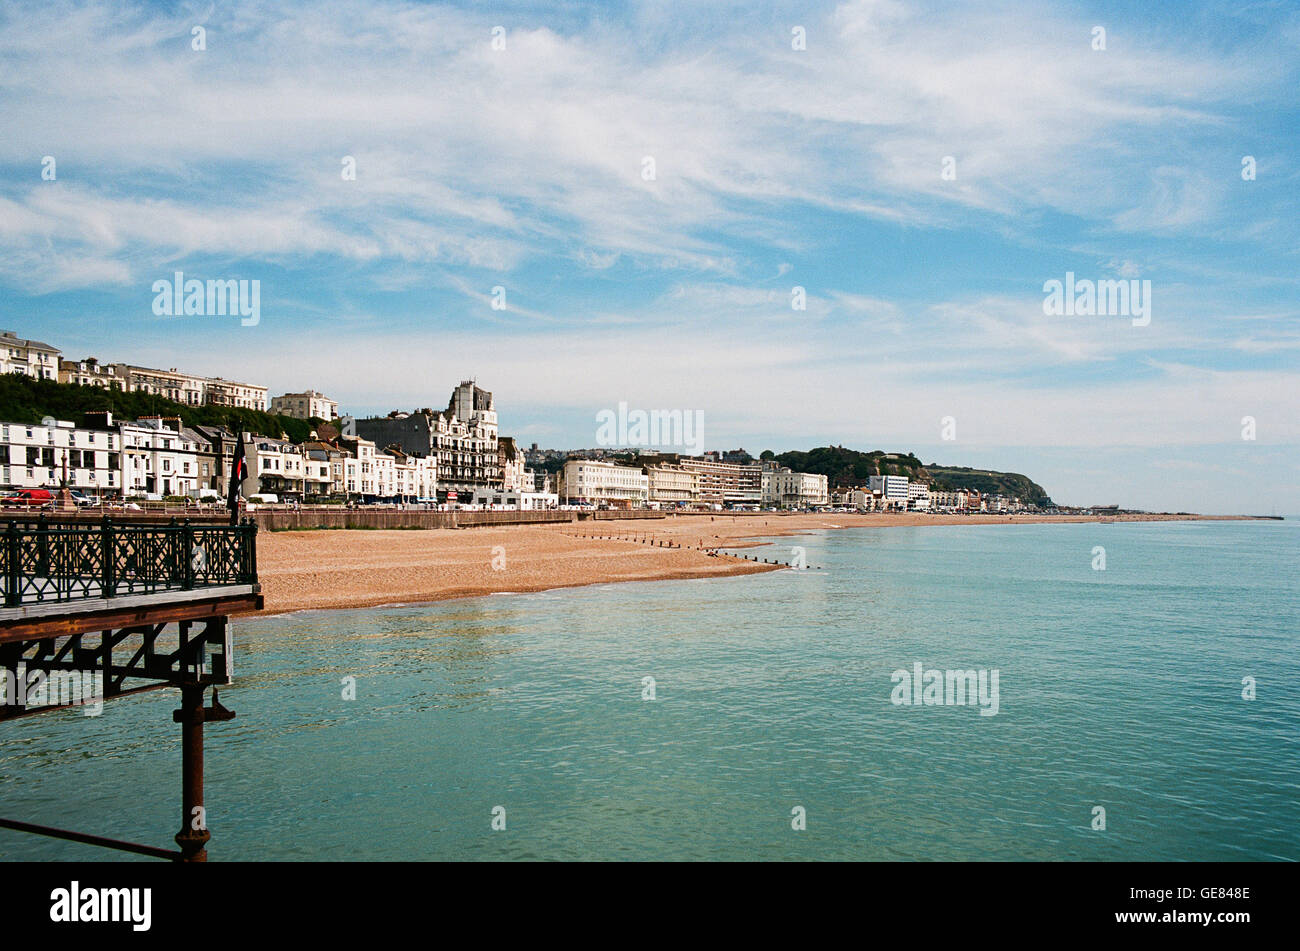 Hastings seafront from the pier, looking east towards the Stade Stock Photo